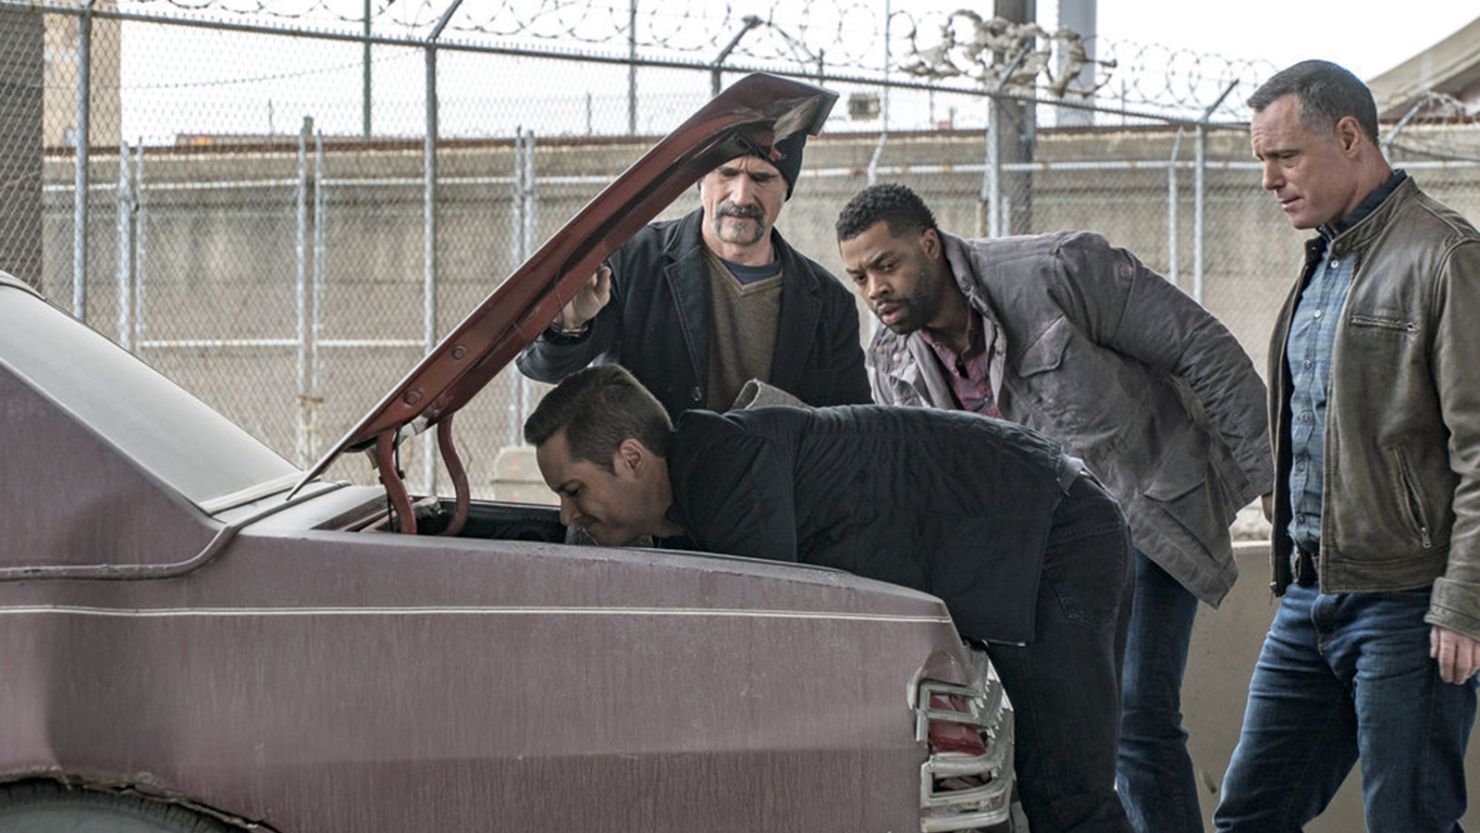 Jesse Lee Soffer, Elias Koteas,  LaRoyce Hawkins and Jason Beghe star in the "Army of One" episode of "Chicago P.D."